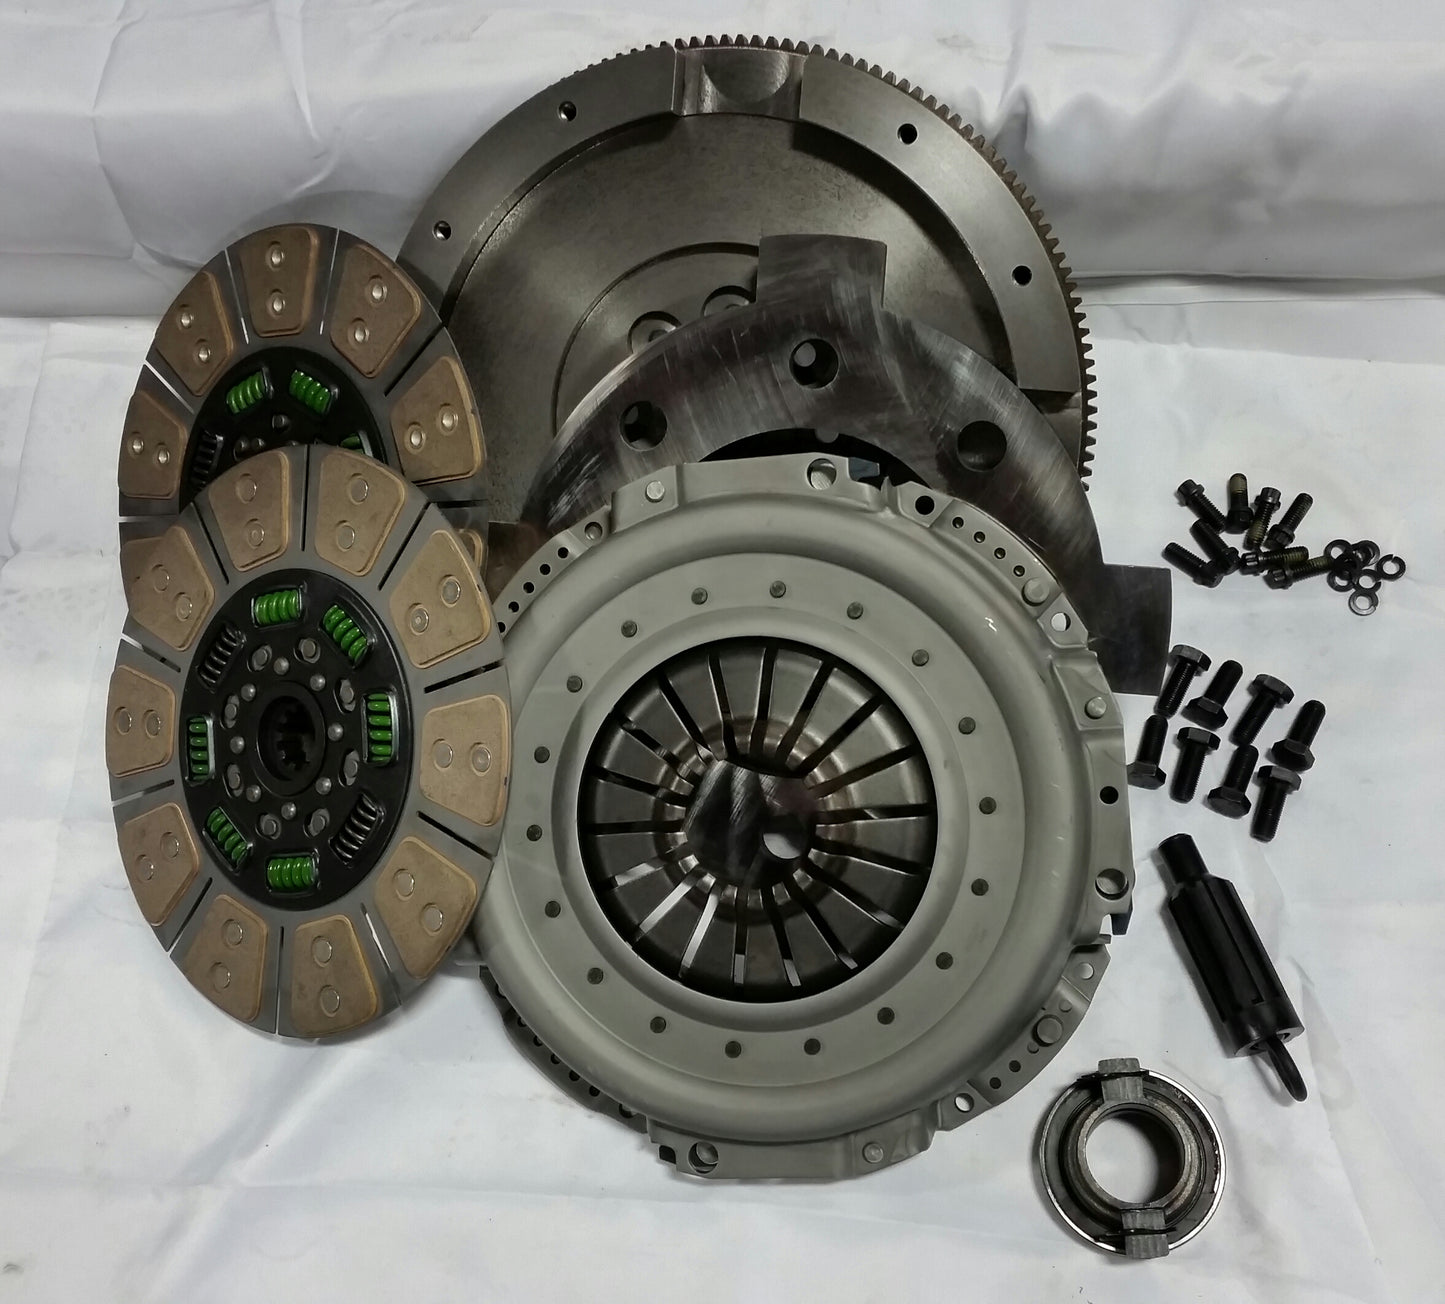 QNV45DDSN Valair Dual Disc QUIET 13" Clutch 1994-2003 Dodge NV4500 & Getrag 5 Speed 13" x 1.375" (Requires 1-3/8" Input Shaft) Ceramic Buttons Hell On Wheels Canada